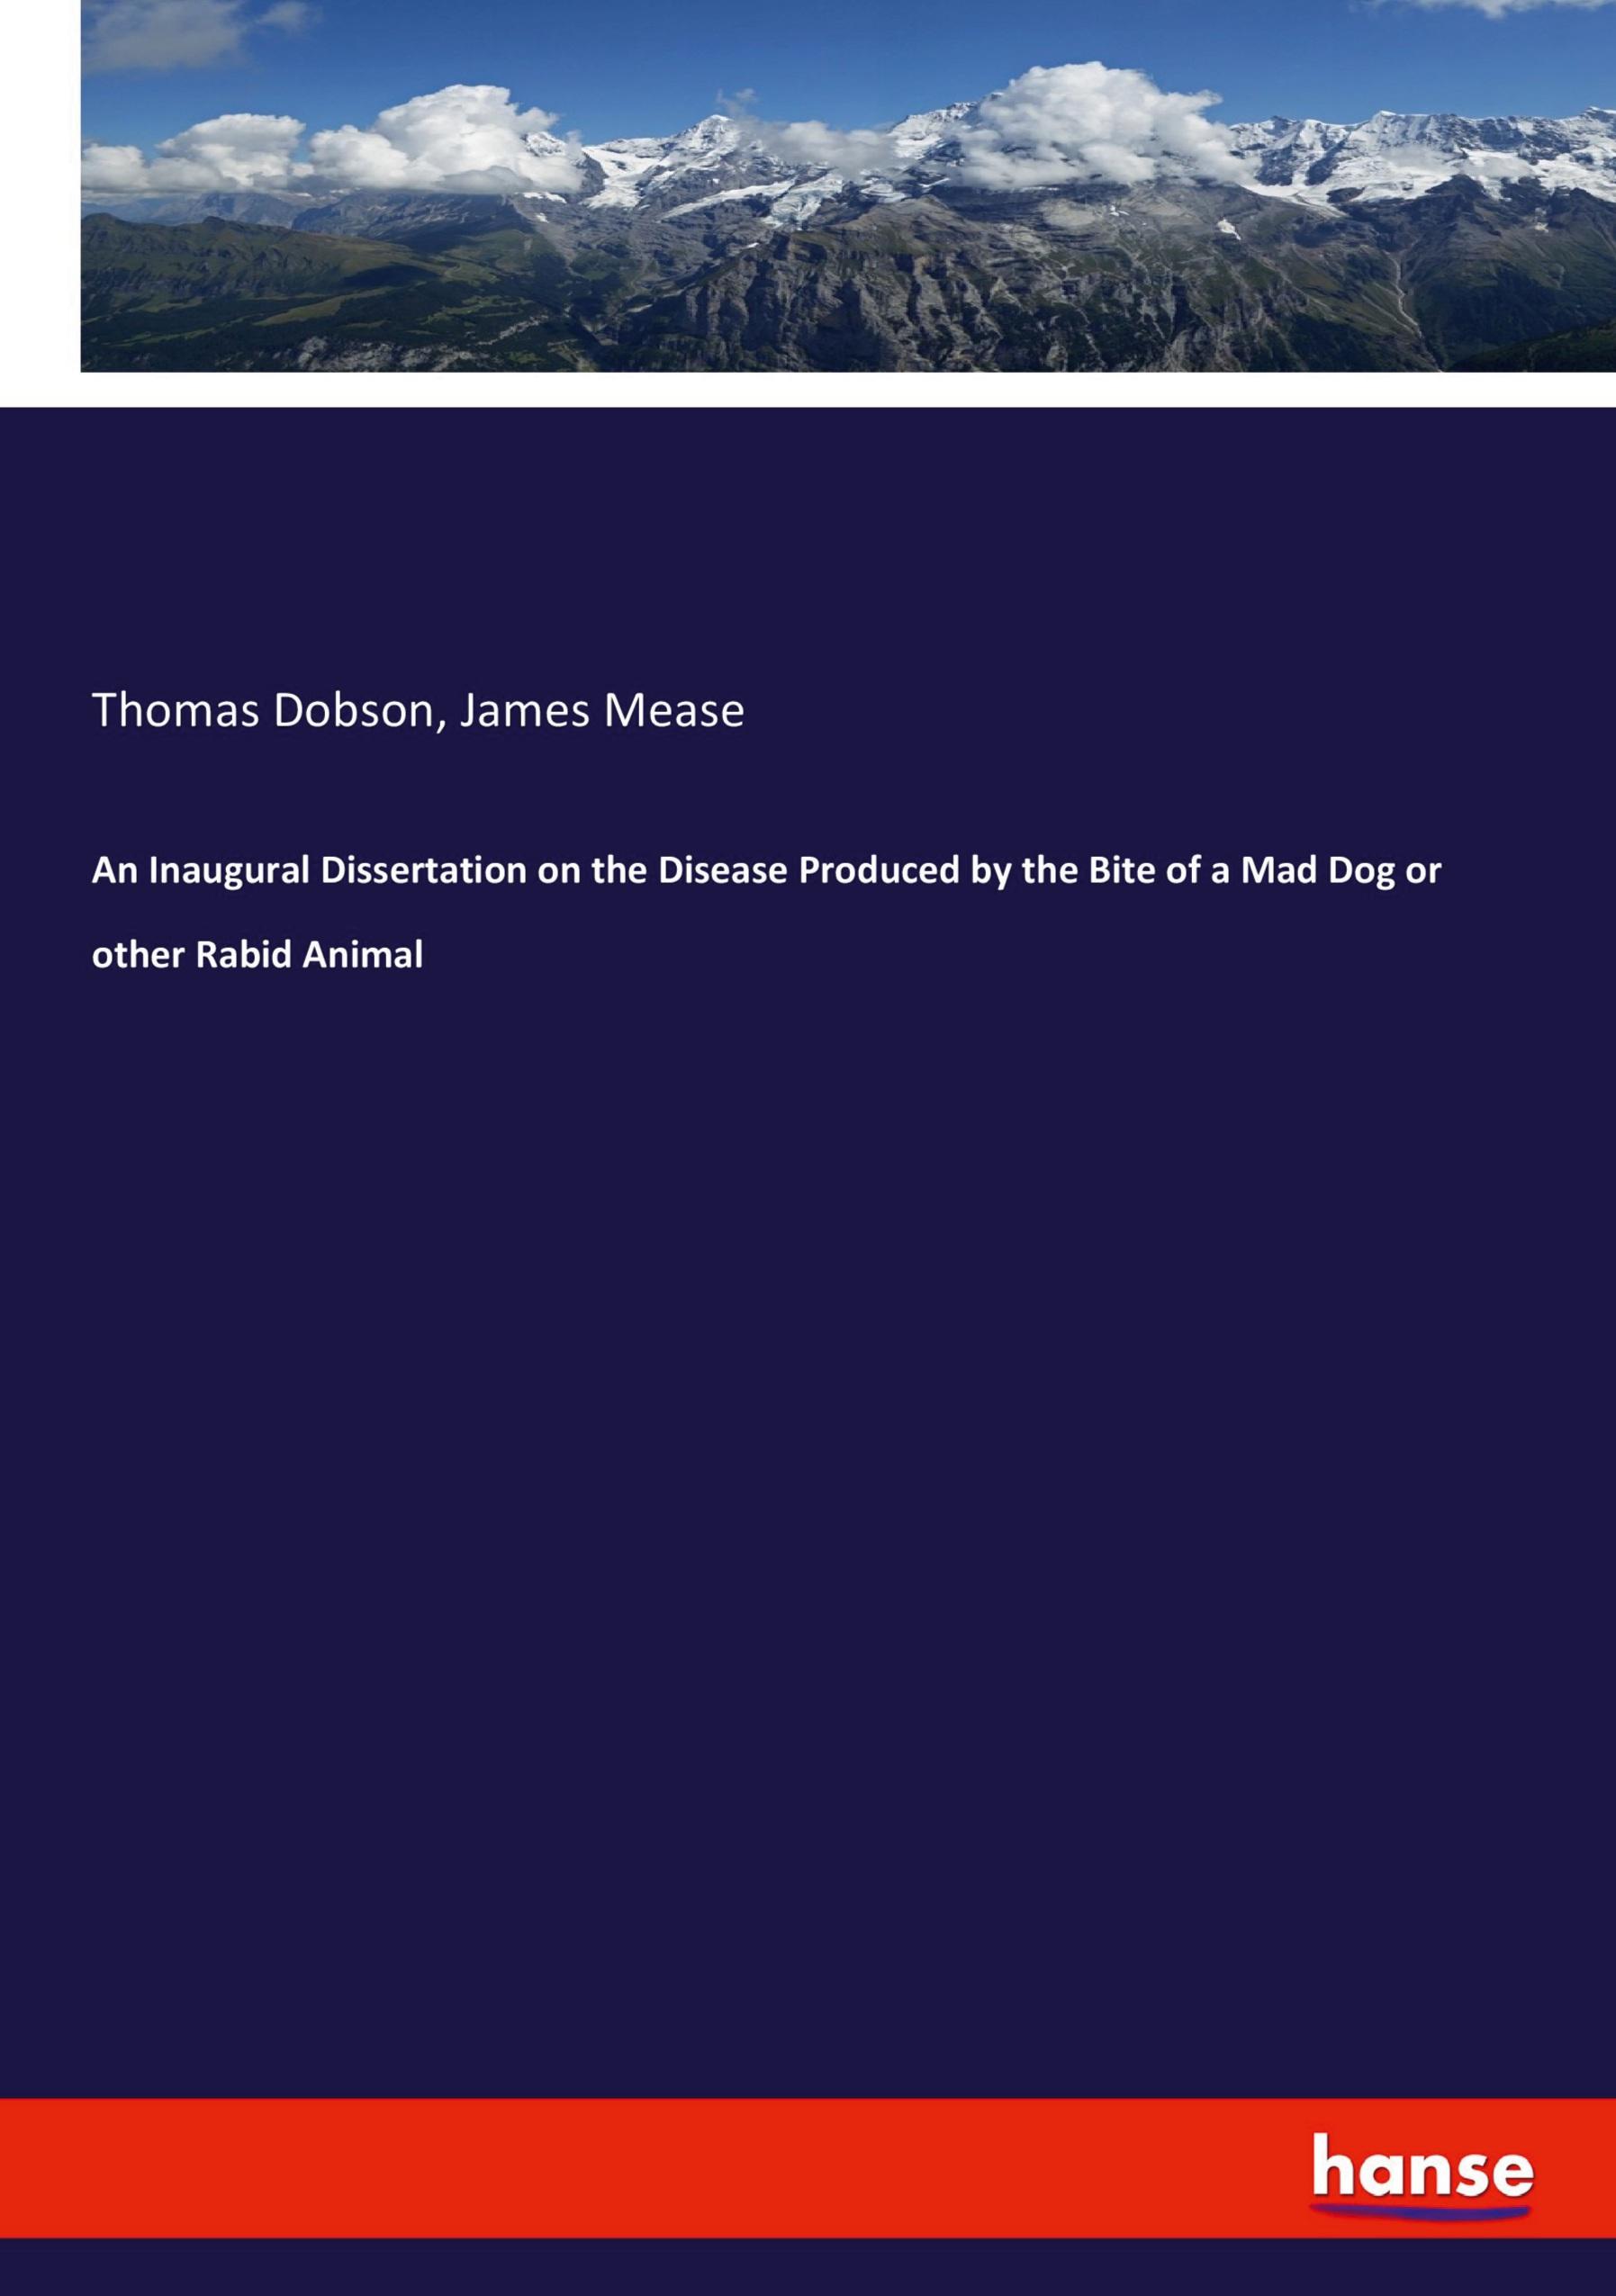 An Inaugural Dissertation on the Disease Produced by the Bite of a Mad Dog or other Rabid Animal - Dobson, Thomas Mease, James